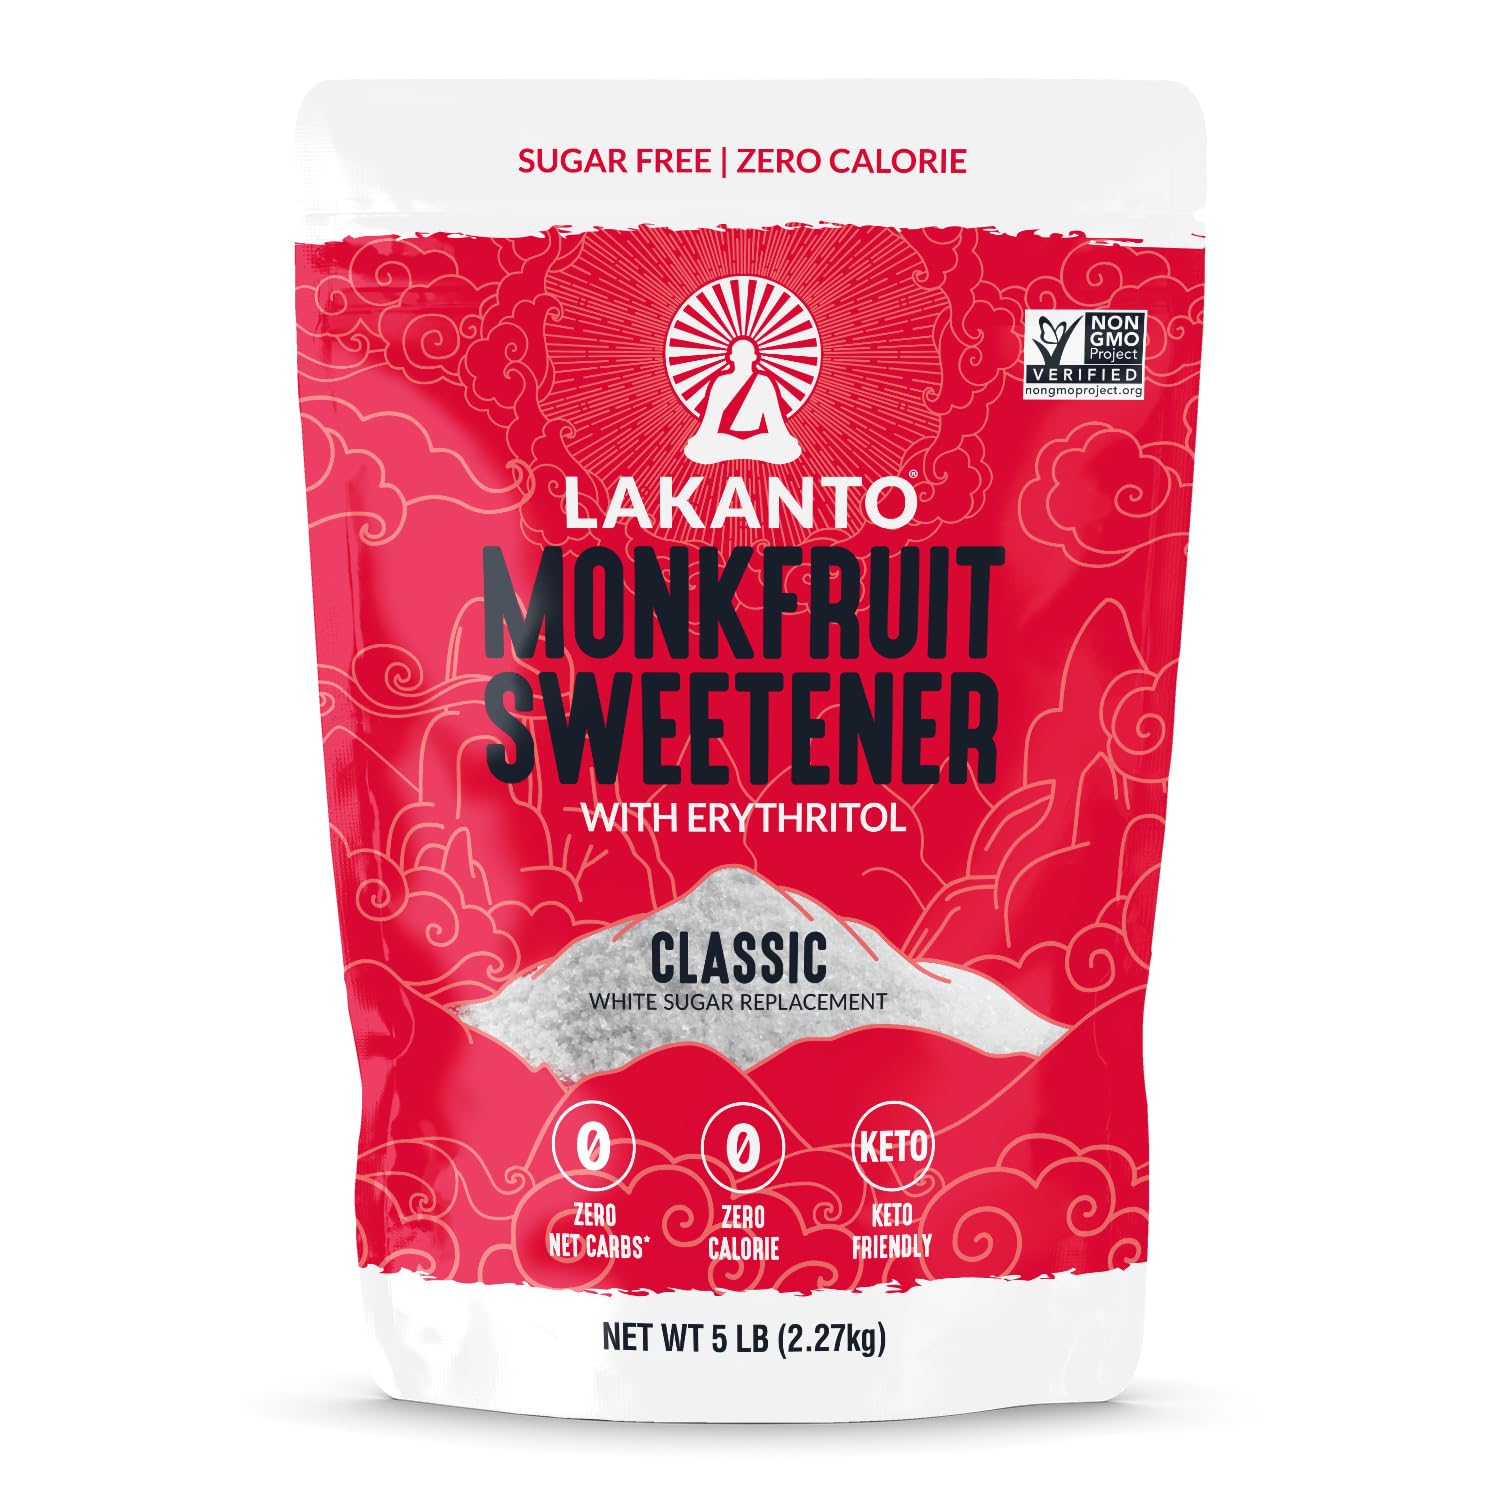 Lakanto Classic Monk Fruit Sweetener with Erythritol - White Sugar Substitute, Zero Calorie, Keto Diet Friendly, Zero Net Carbs, Baking, Extract, Sugar Replacement (Classic White - 5 lb)